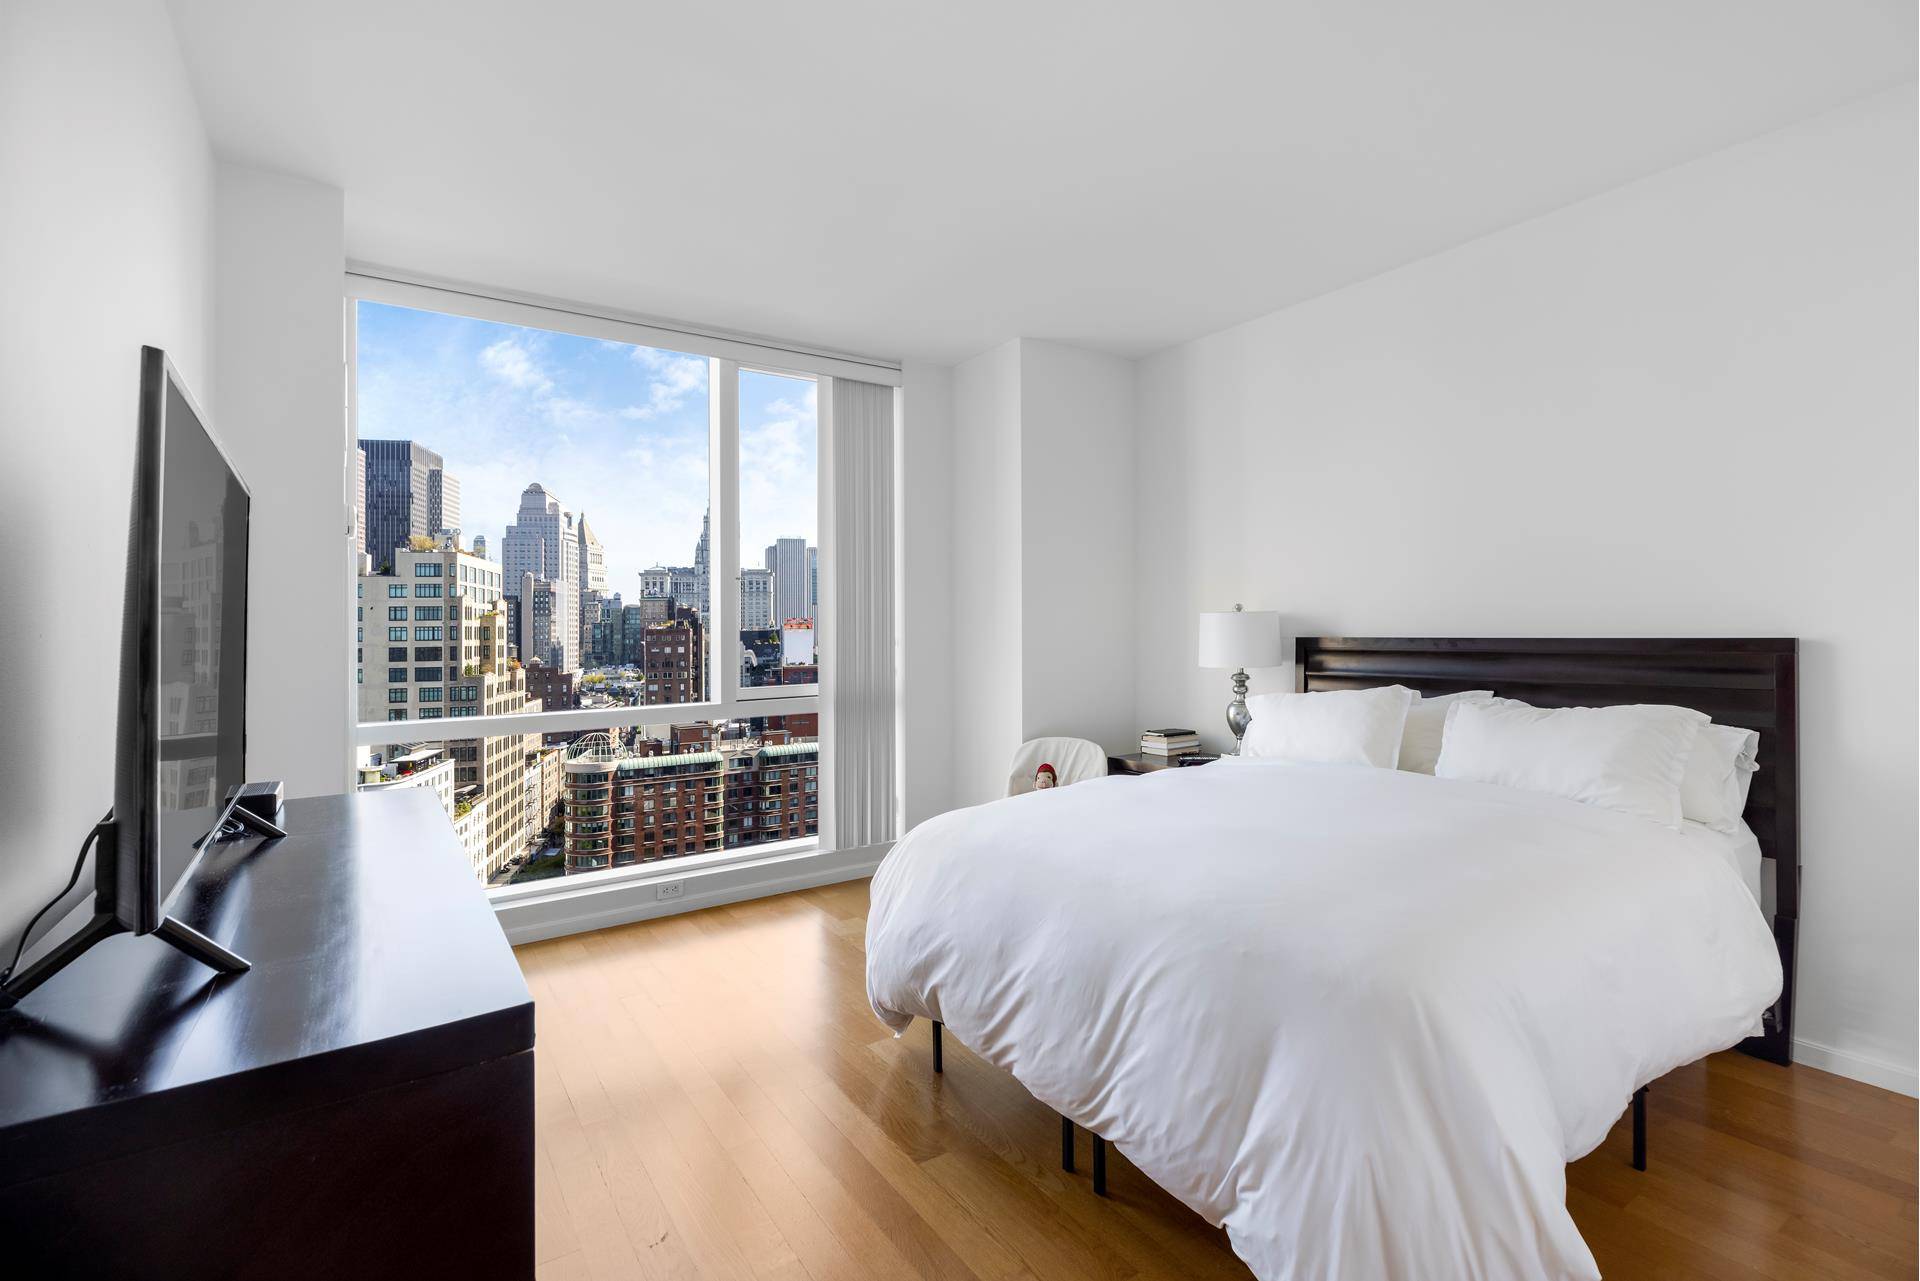 CITY SCAPE VIEWS FOR MILES AND MILES City scape views of the downtown area and Tribeca can be seen from this easterly facing high floor one bedroom one bathroom at ...